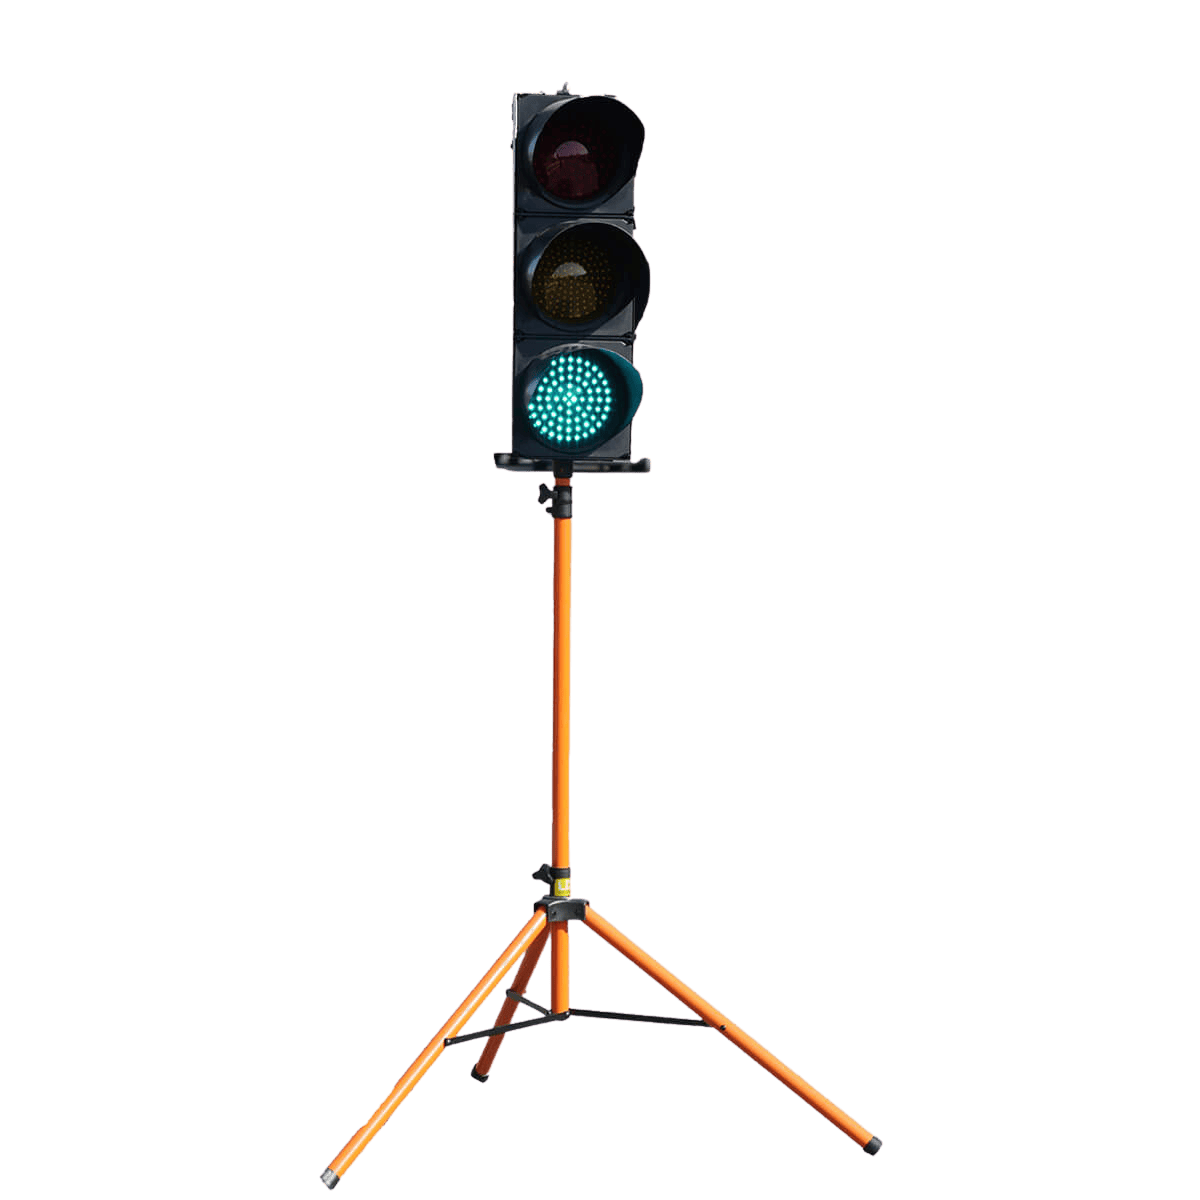 Portable Traffic Control Devices